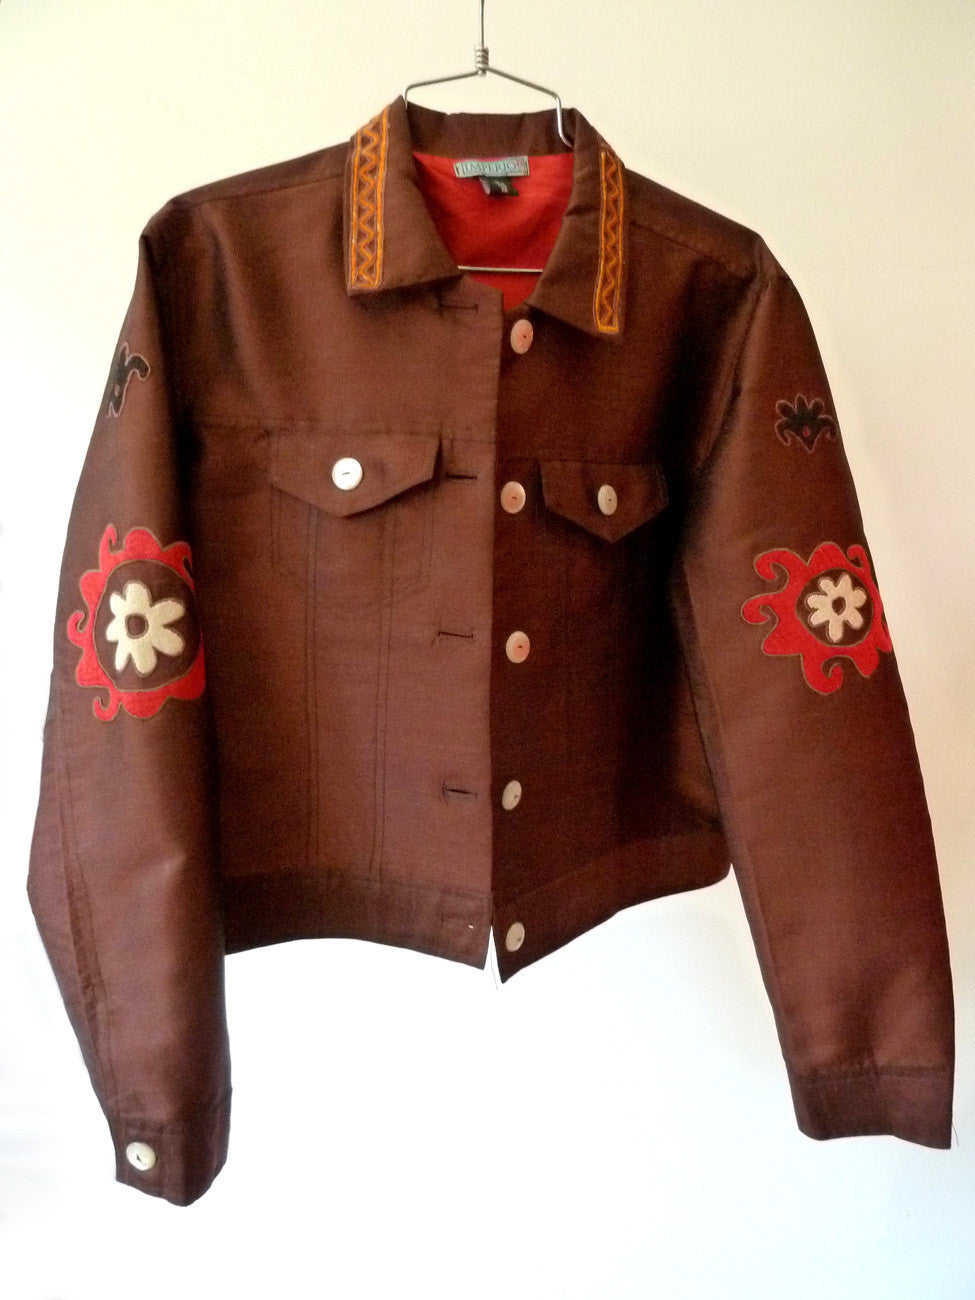 Jean Jacket Vintage Suzani Embroidery Chocolate Coral